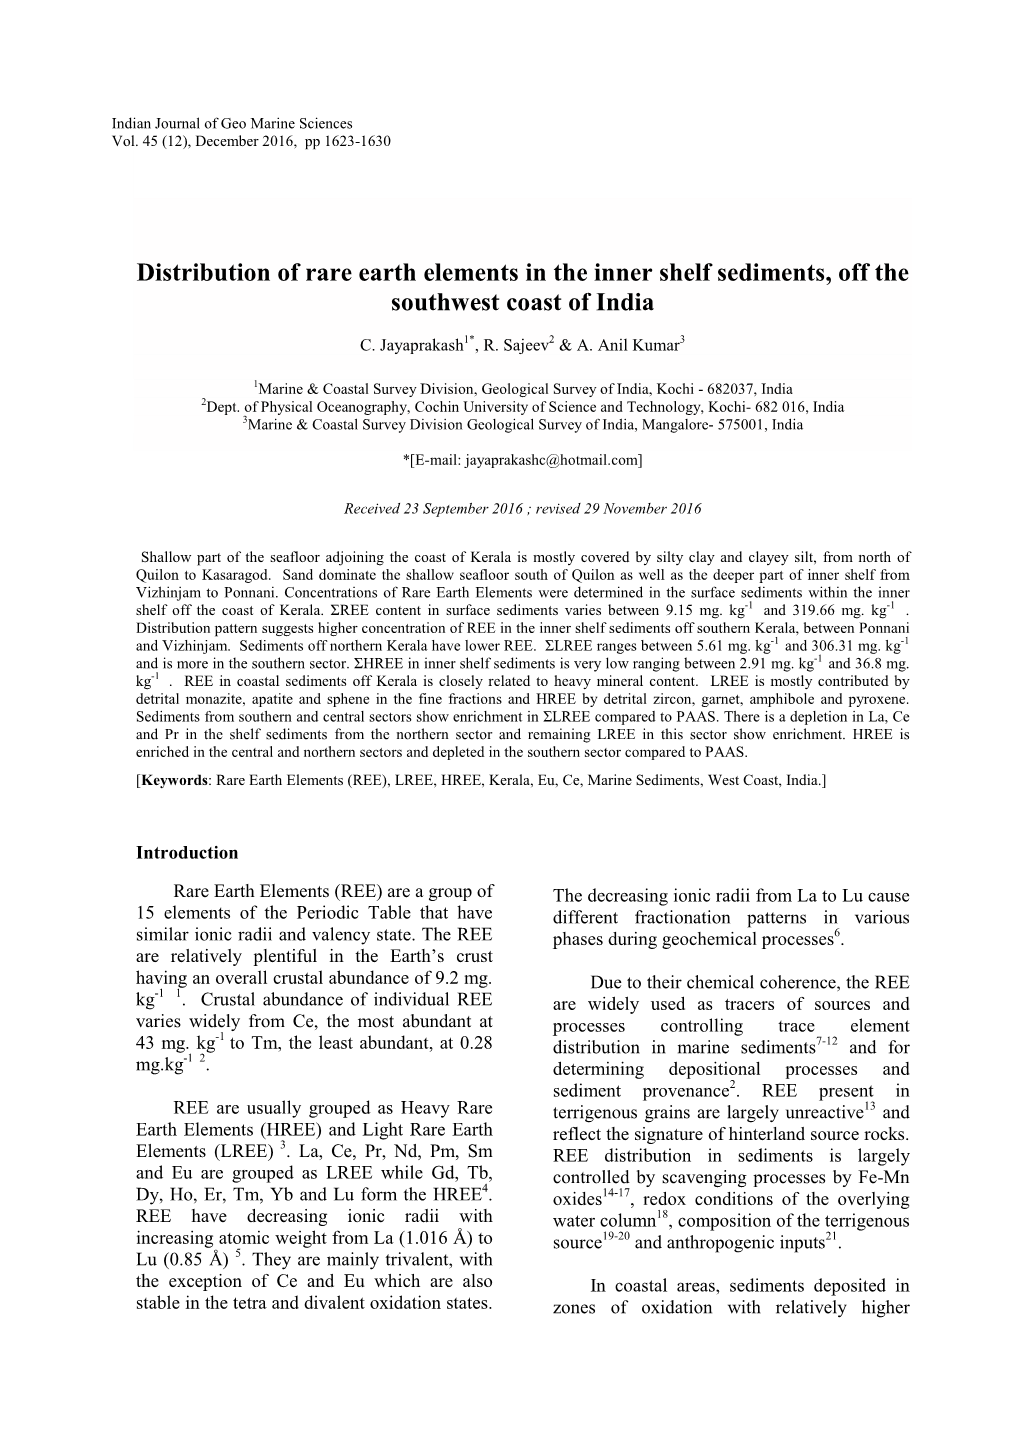 Distribution of Rare Earth Elements in the Inner Shelf Sediments, Off the Southwest Coast of India